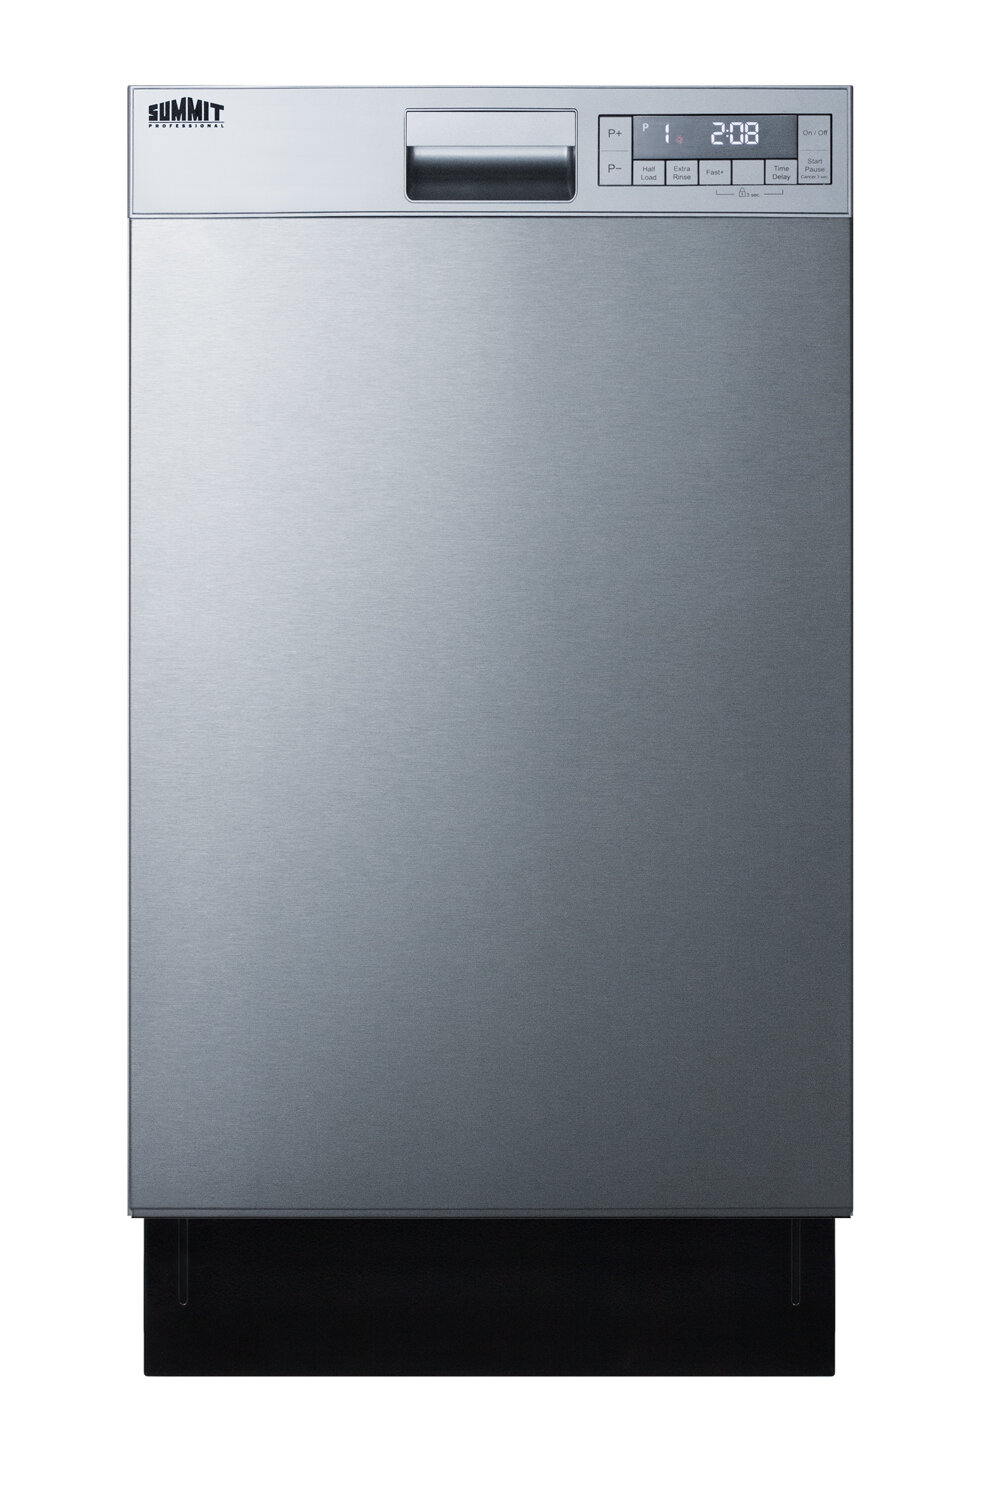 Black+decker bcd6w compact countertop dishwasher review 